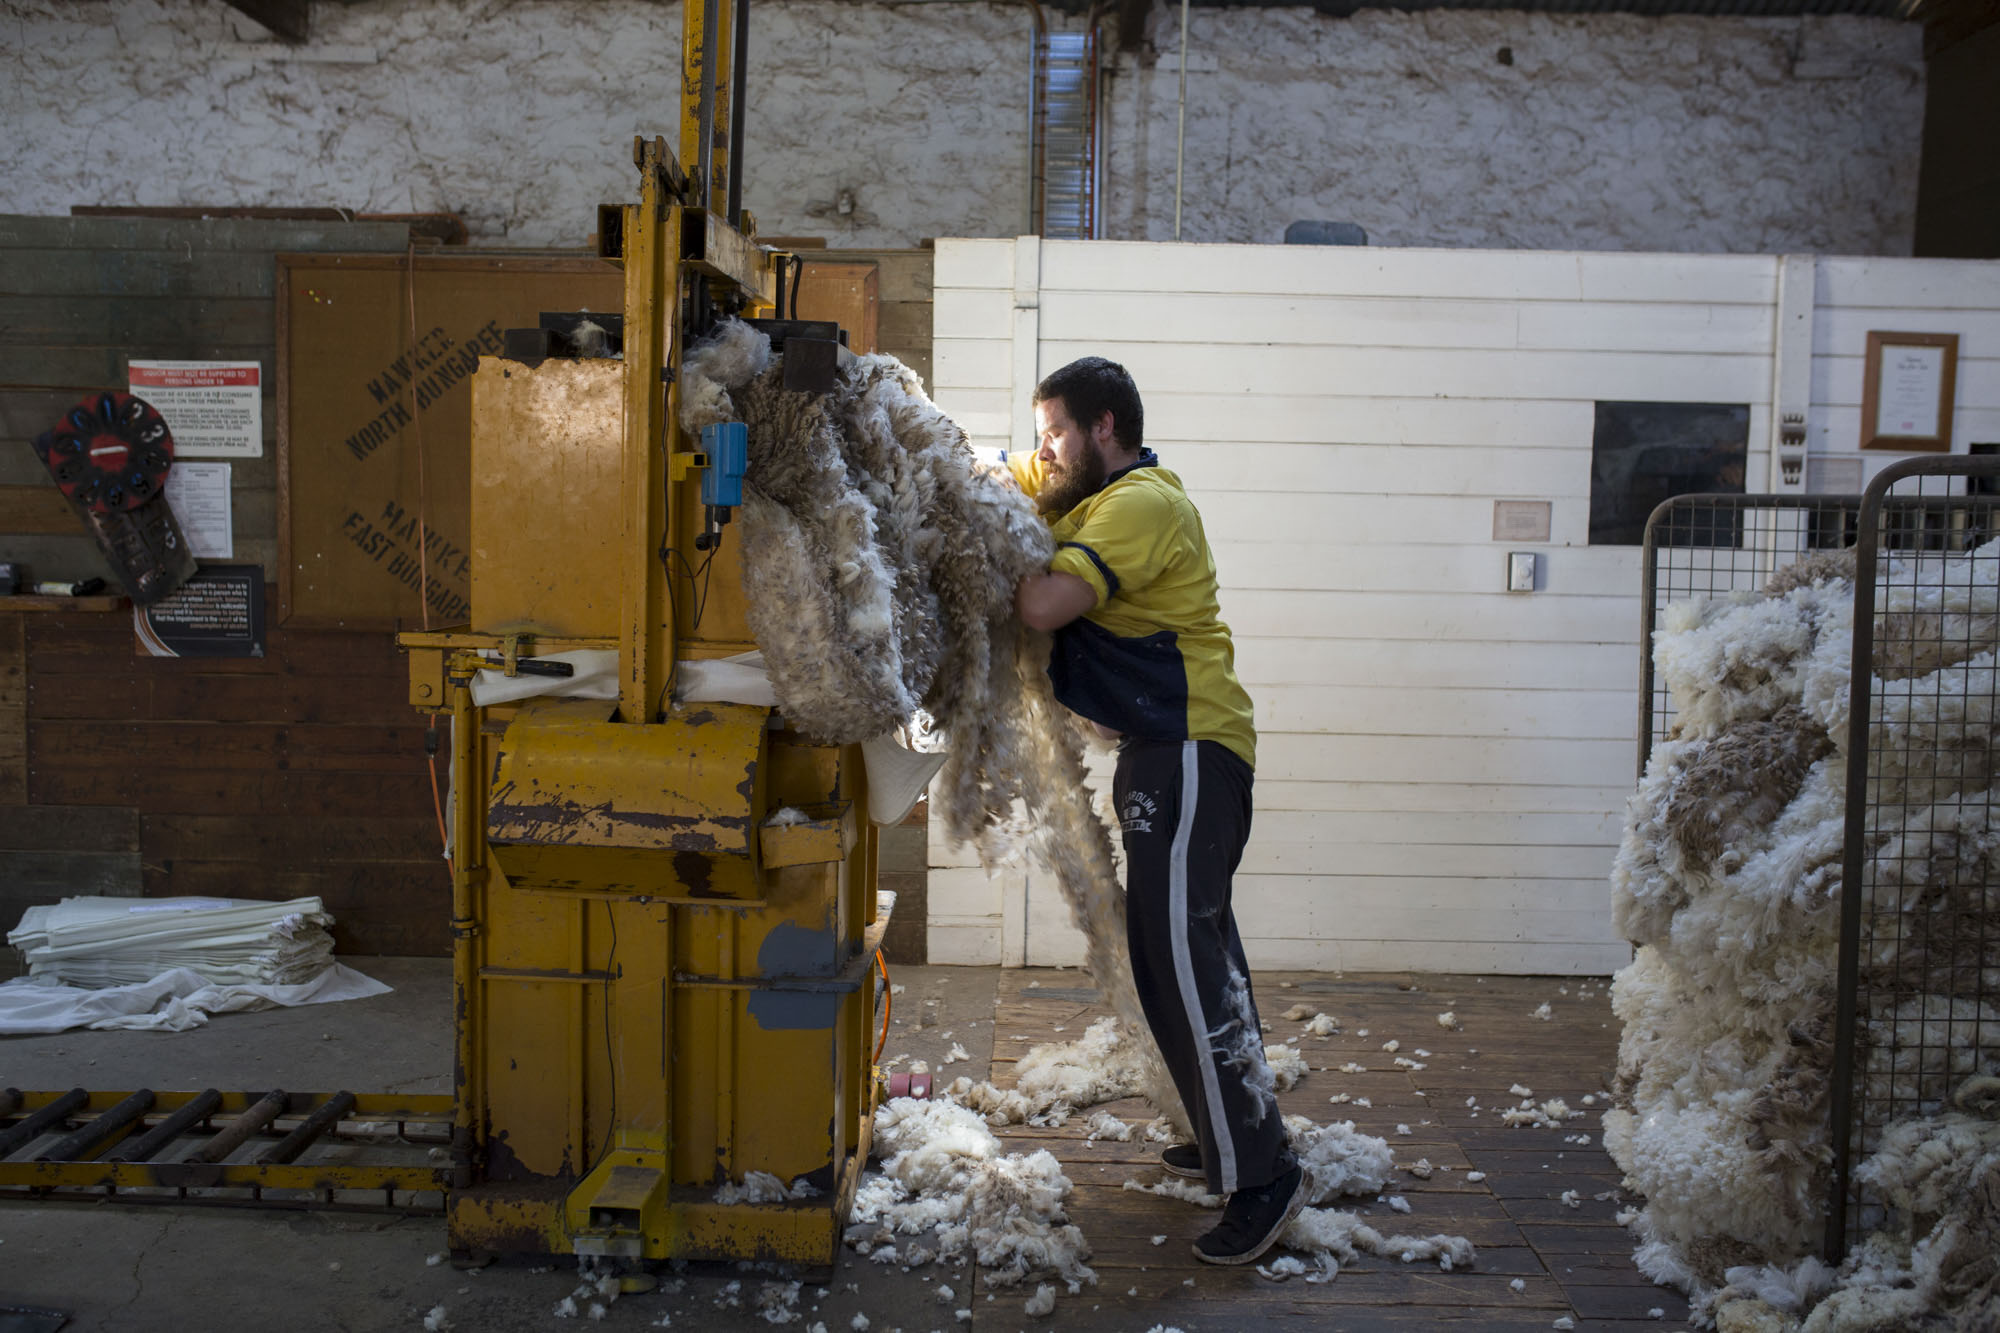  “CLICK GO THE SHEARS – FOR 175 YEARS” EVENT at Bungaree Station, South Australia.
Shearing Contractors for Neville Clarke, NJ & VI Clarke Shearing. 
Stephen Hean pressing the wool into bales   